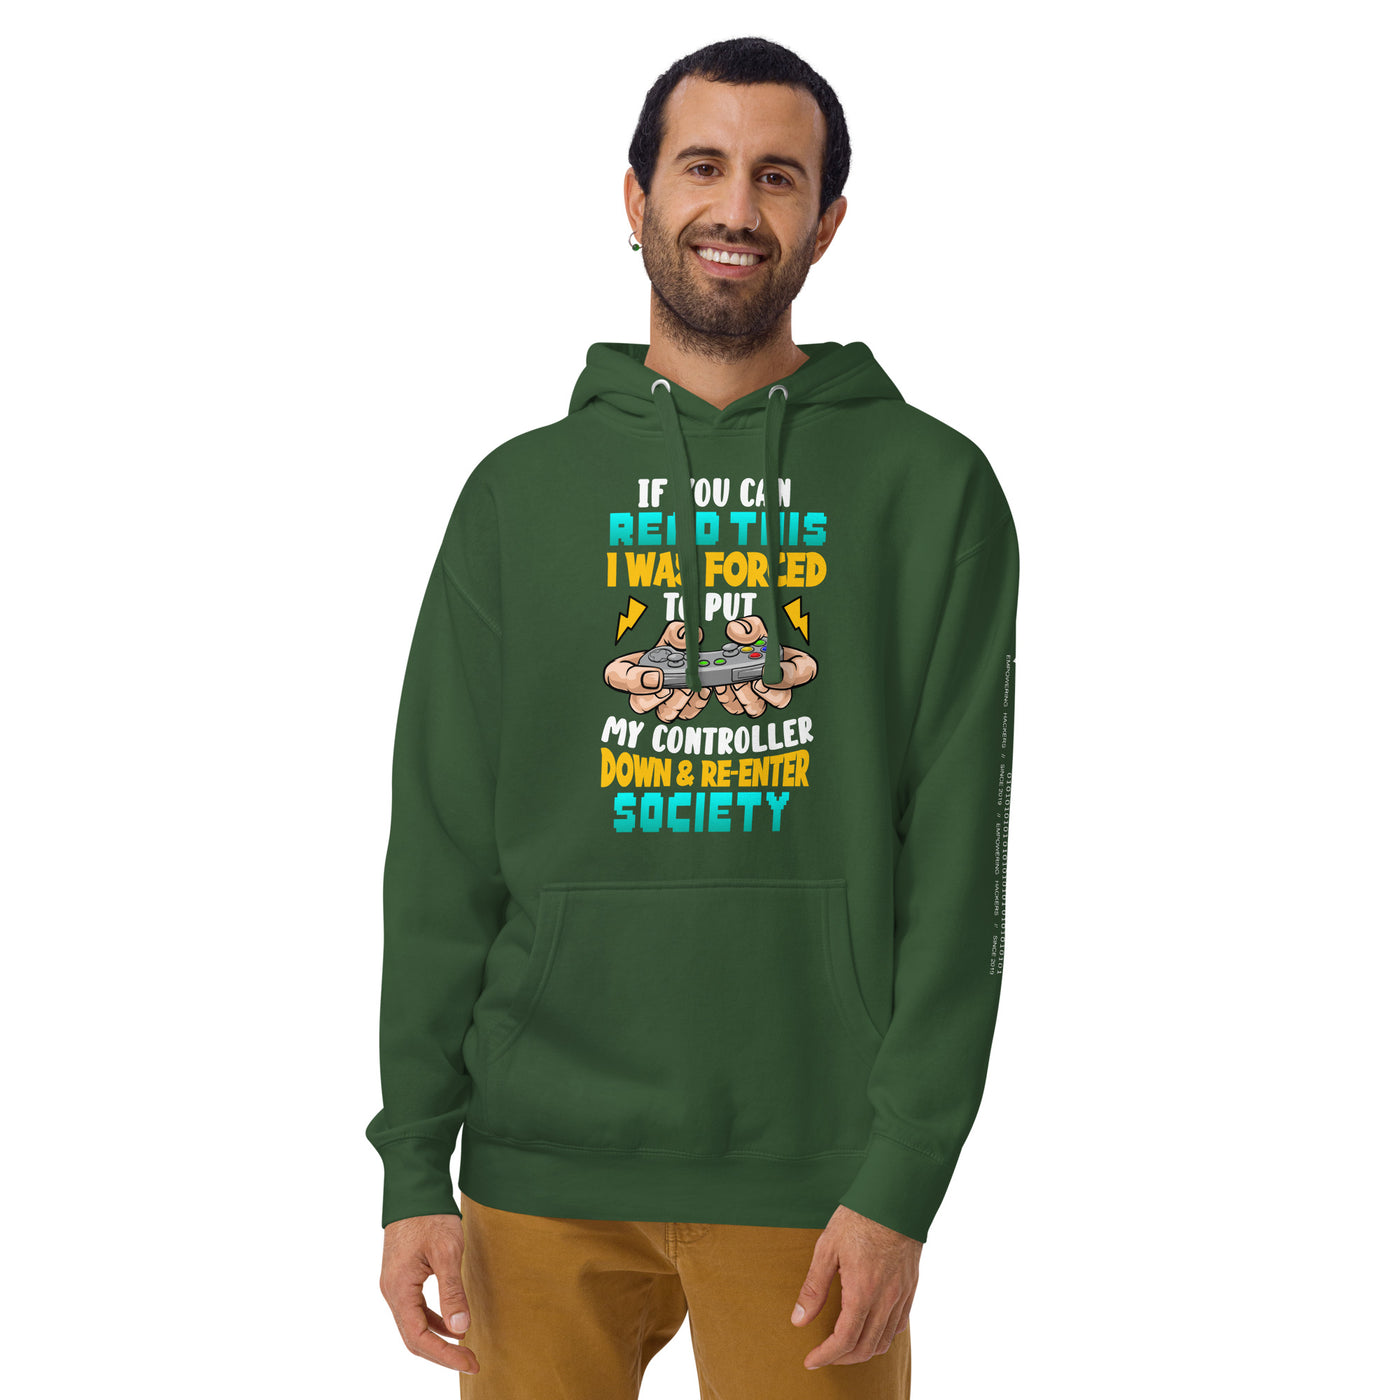 If you can read this, I am forced to put my controller down and reenter society - Unisex Hoodie